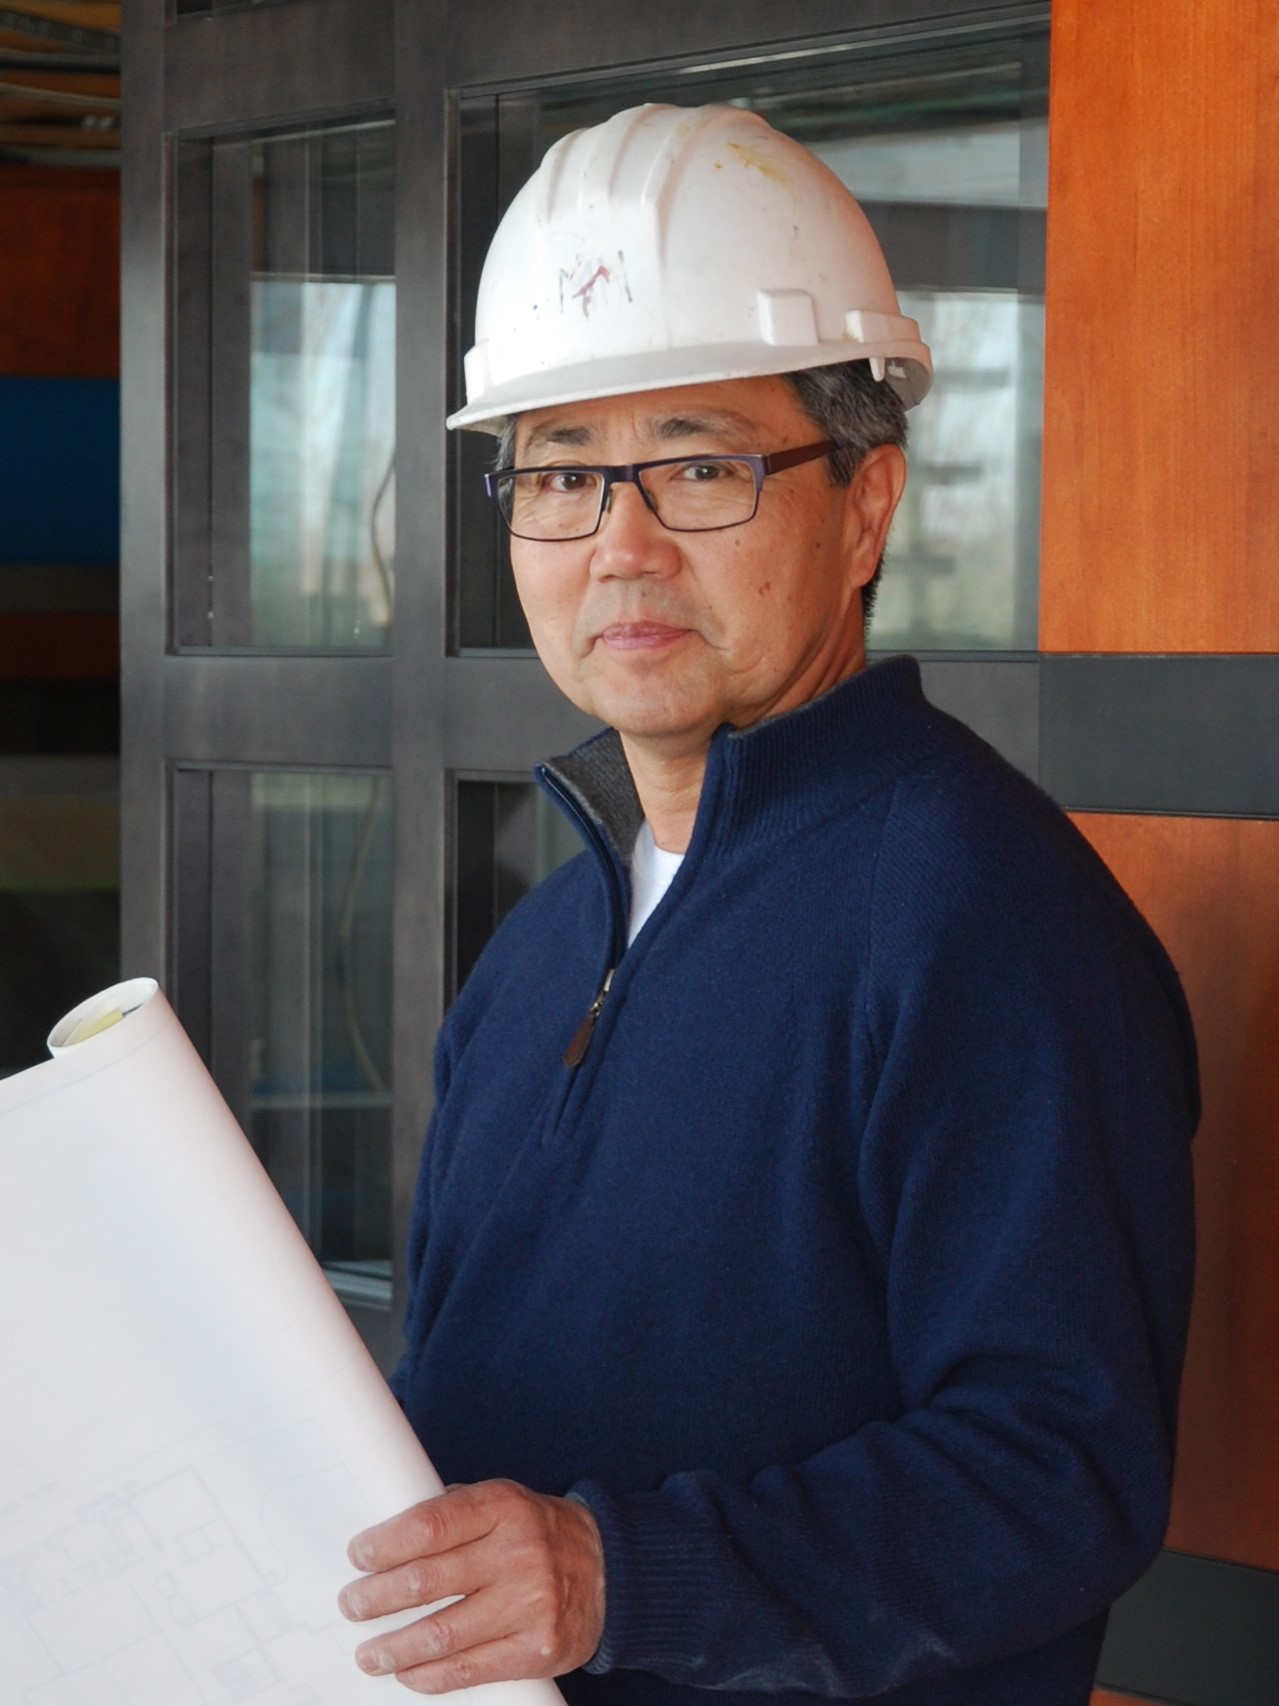 Image shows a man with glasses and a white hard hat. He is wearing a blue sweater and holding a large roll of paper.